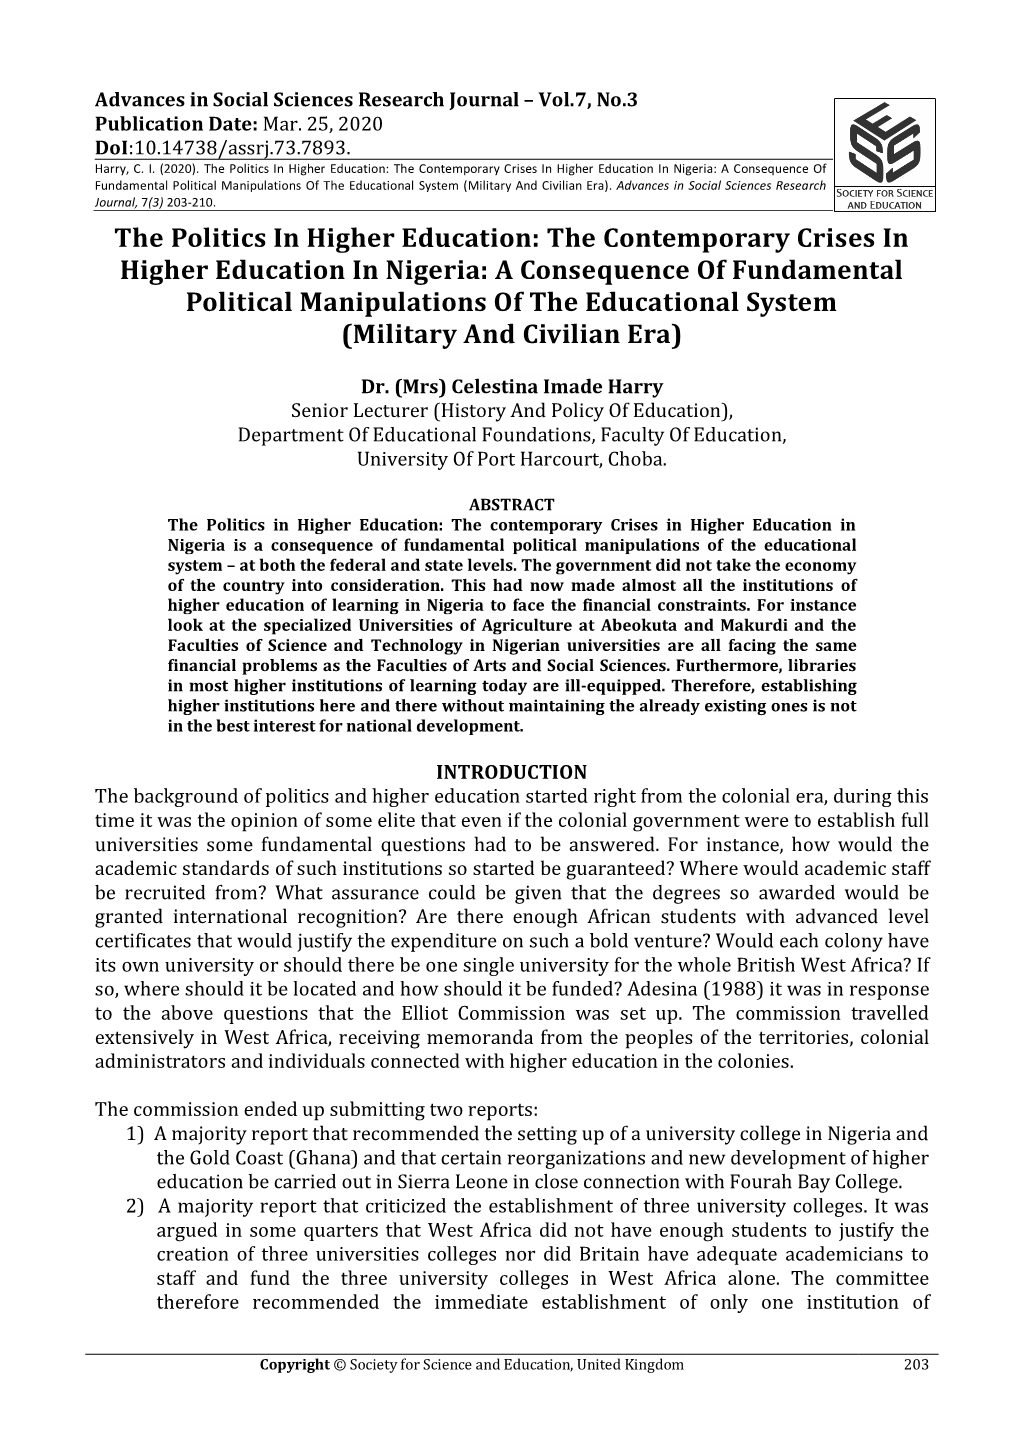 The Contemporary Crises in Higher Education in Nigeria: a Consequence of Fundamental Political Manipulations of the Educational System (Military and Civilian Era)